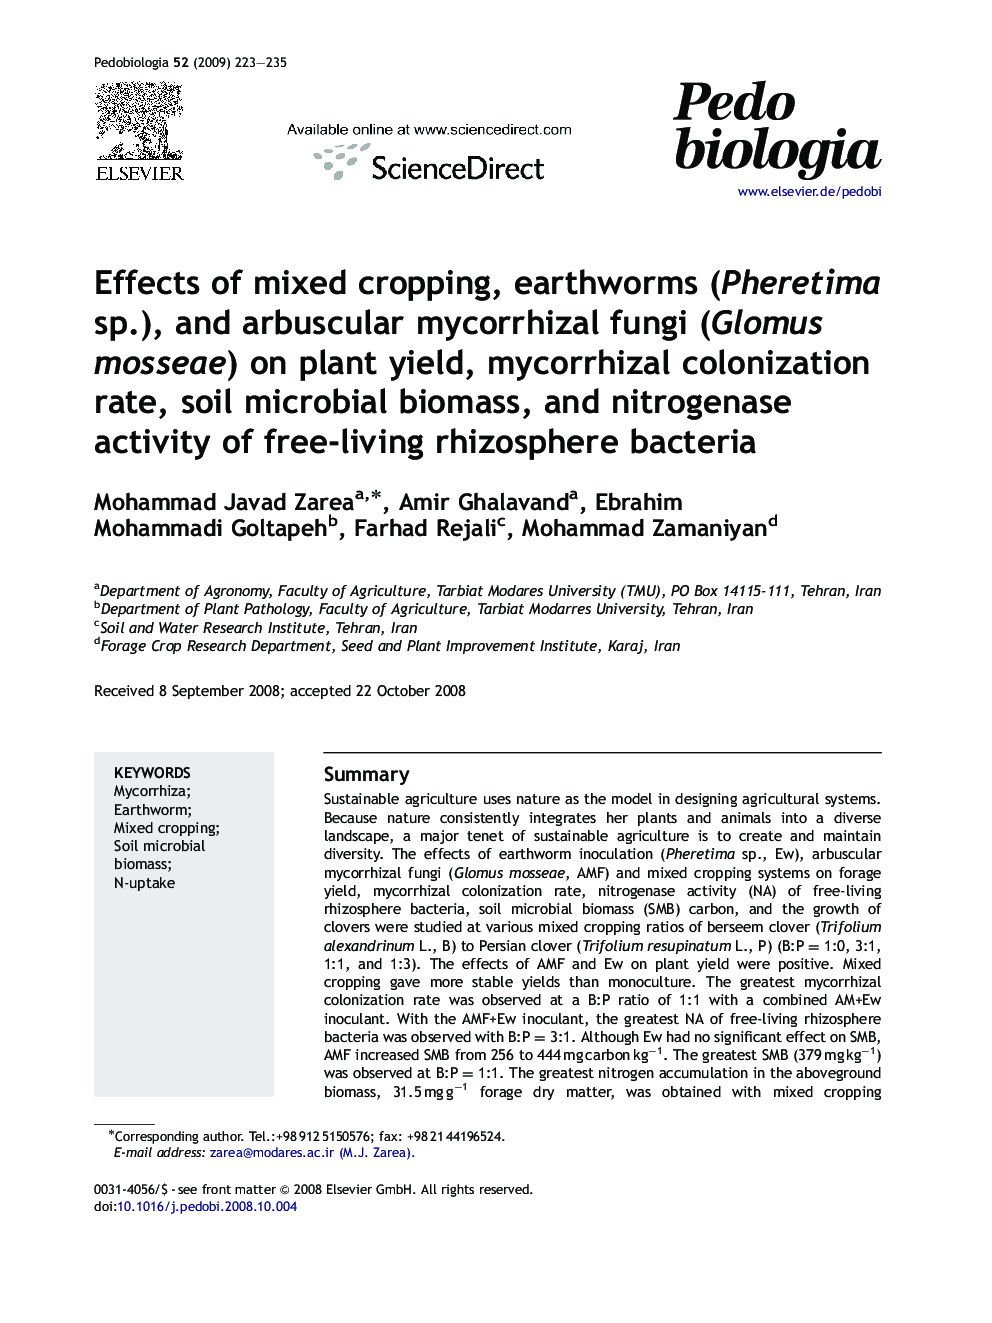 Effects of mixed cropping, earthworms (Pheretima sp.), and arbuscular mycorrhizal fungi (Glomus mosseae) on plant yield, mycorrhizal colonization rate, soil microbial biomass, and nitrogenase activity of free-living rhizosphere bacteria